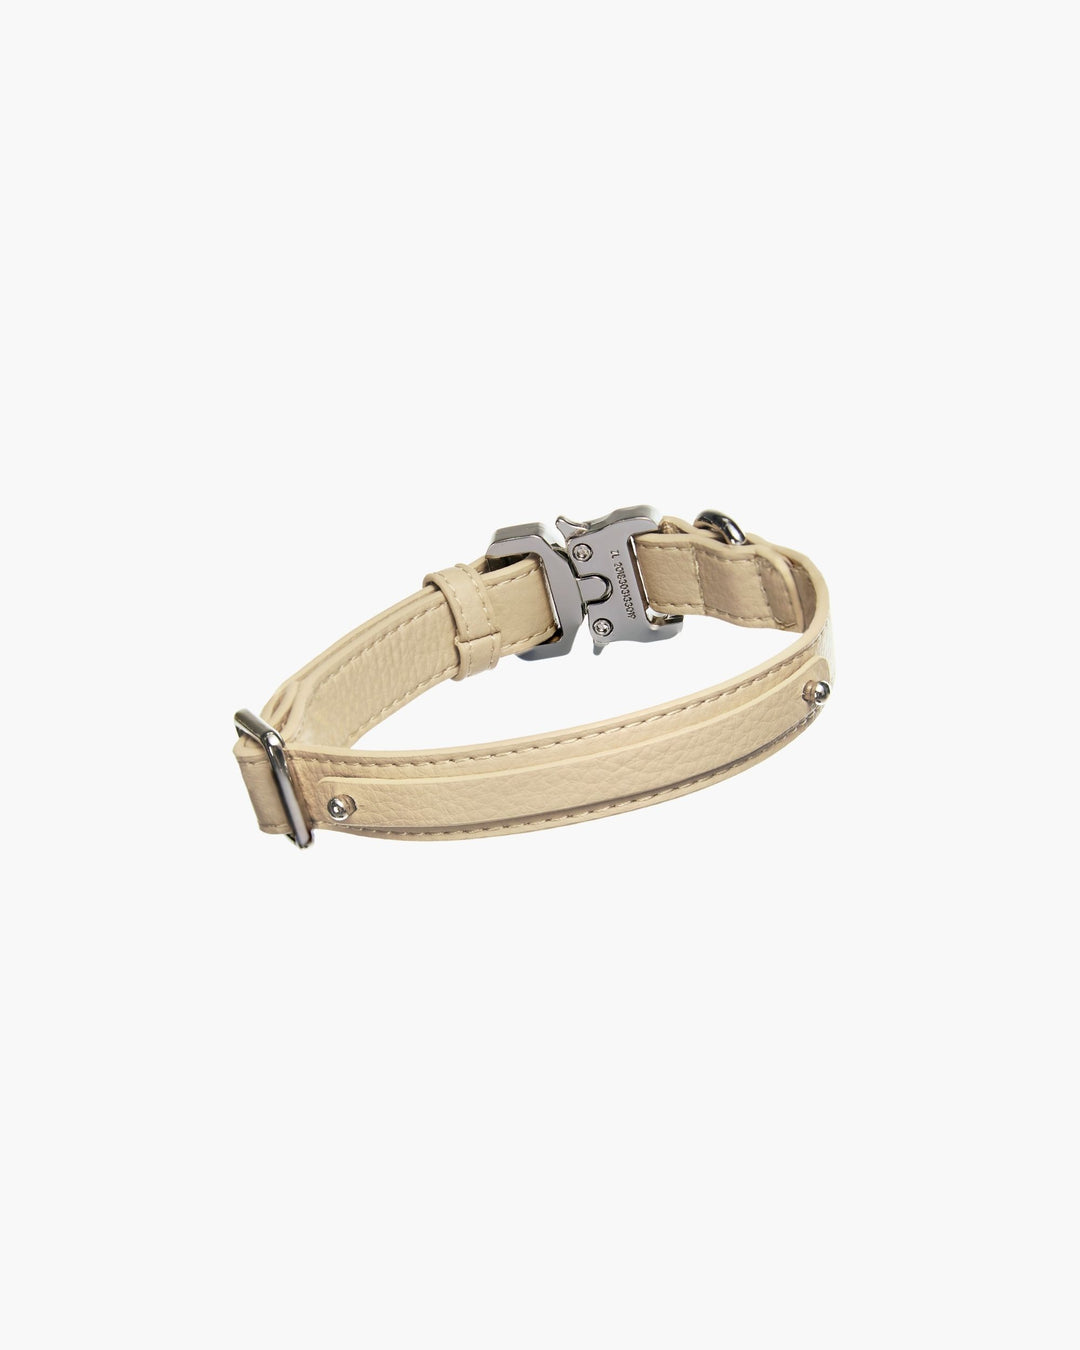 STRAY-ED Signature Dog Collar without letters- Sand